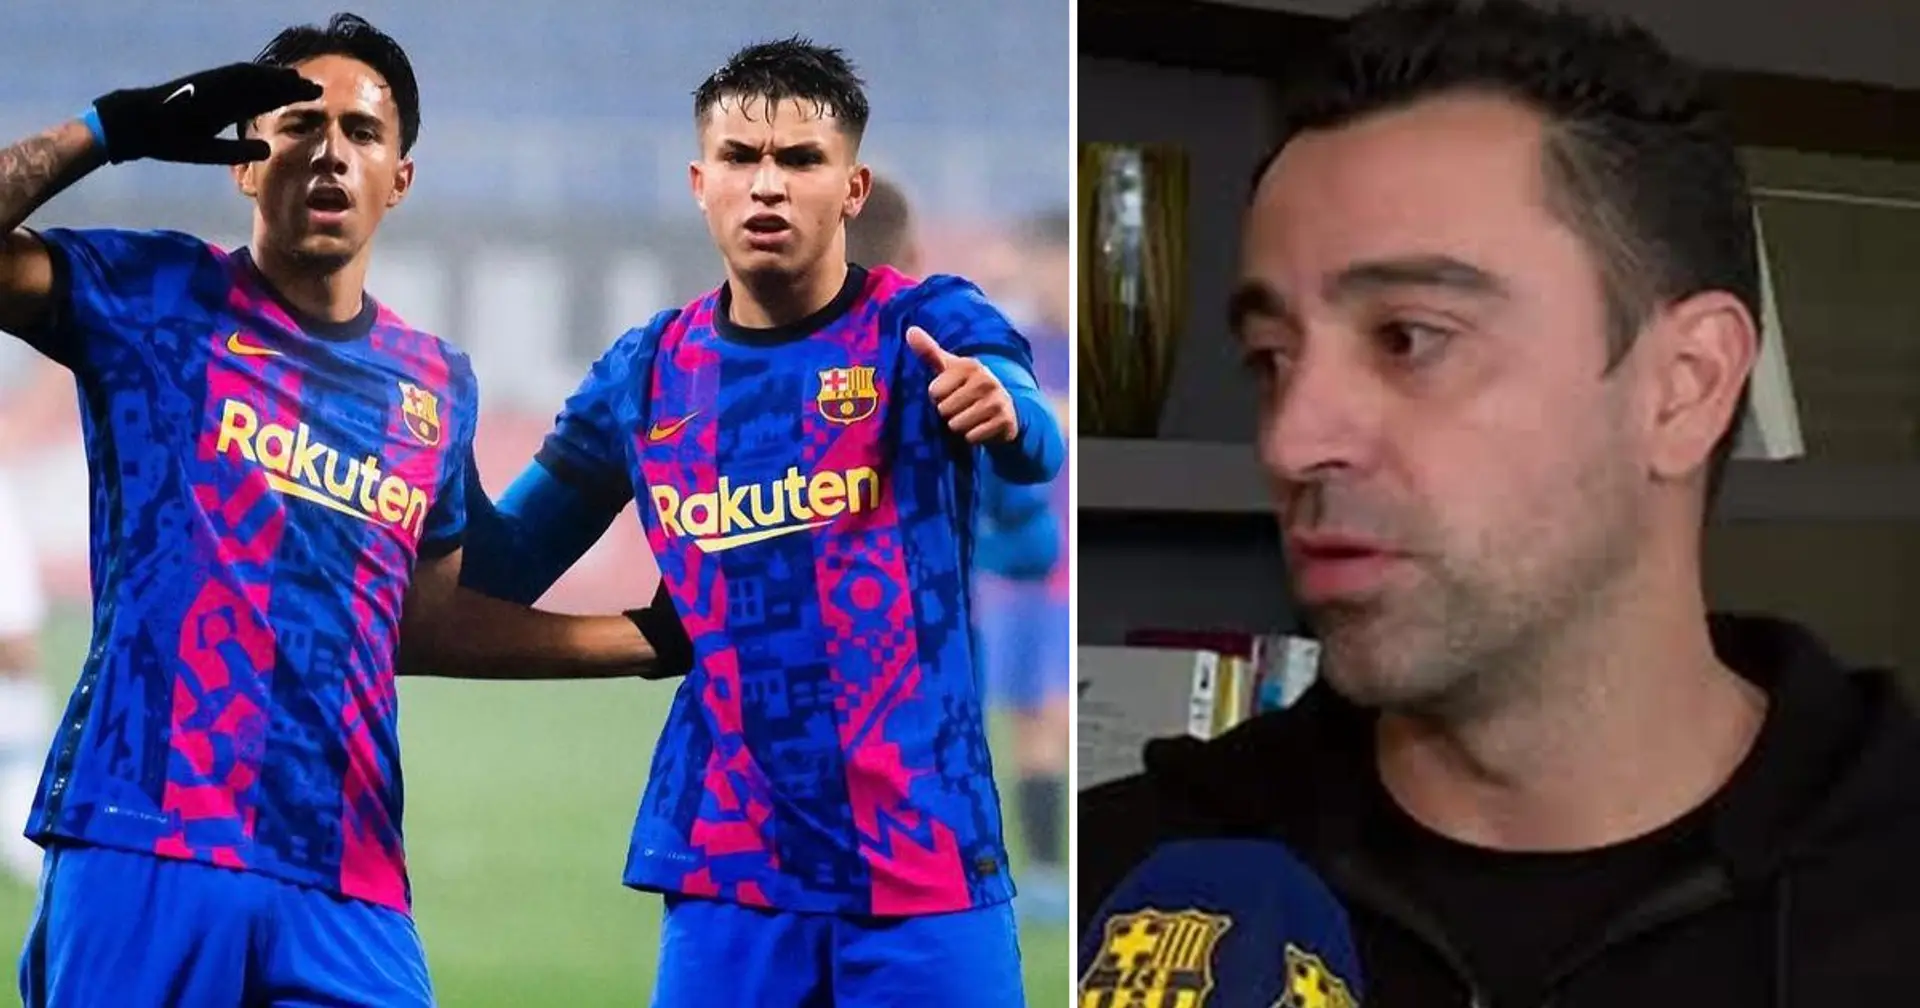 7 La Masia players invited by Xavi to beef-up first team revealed by reporters